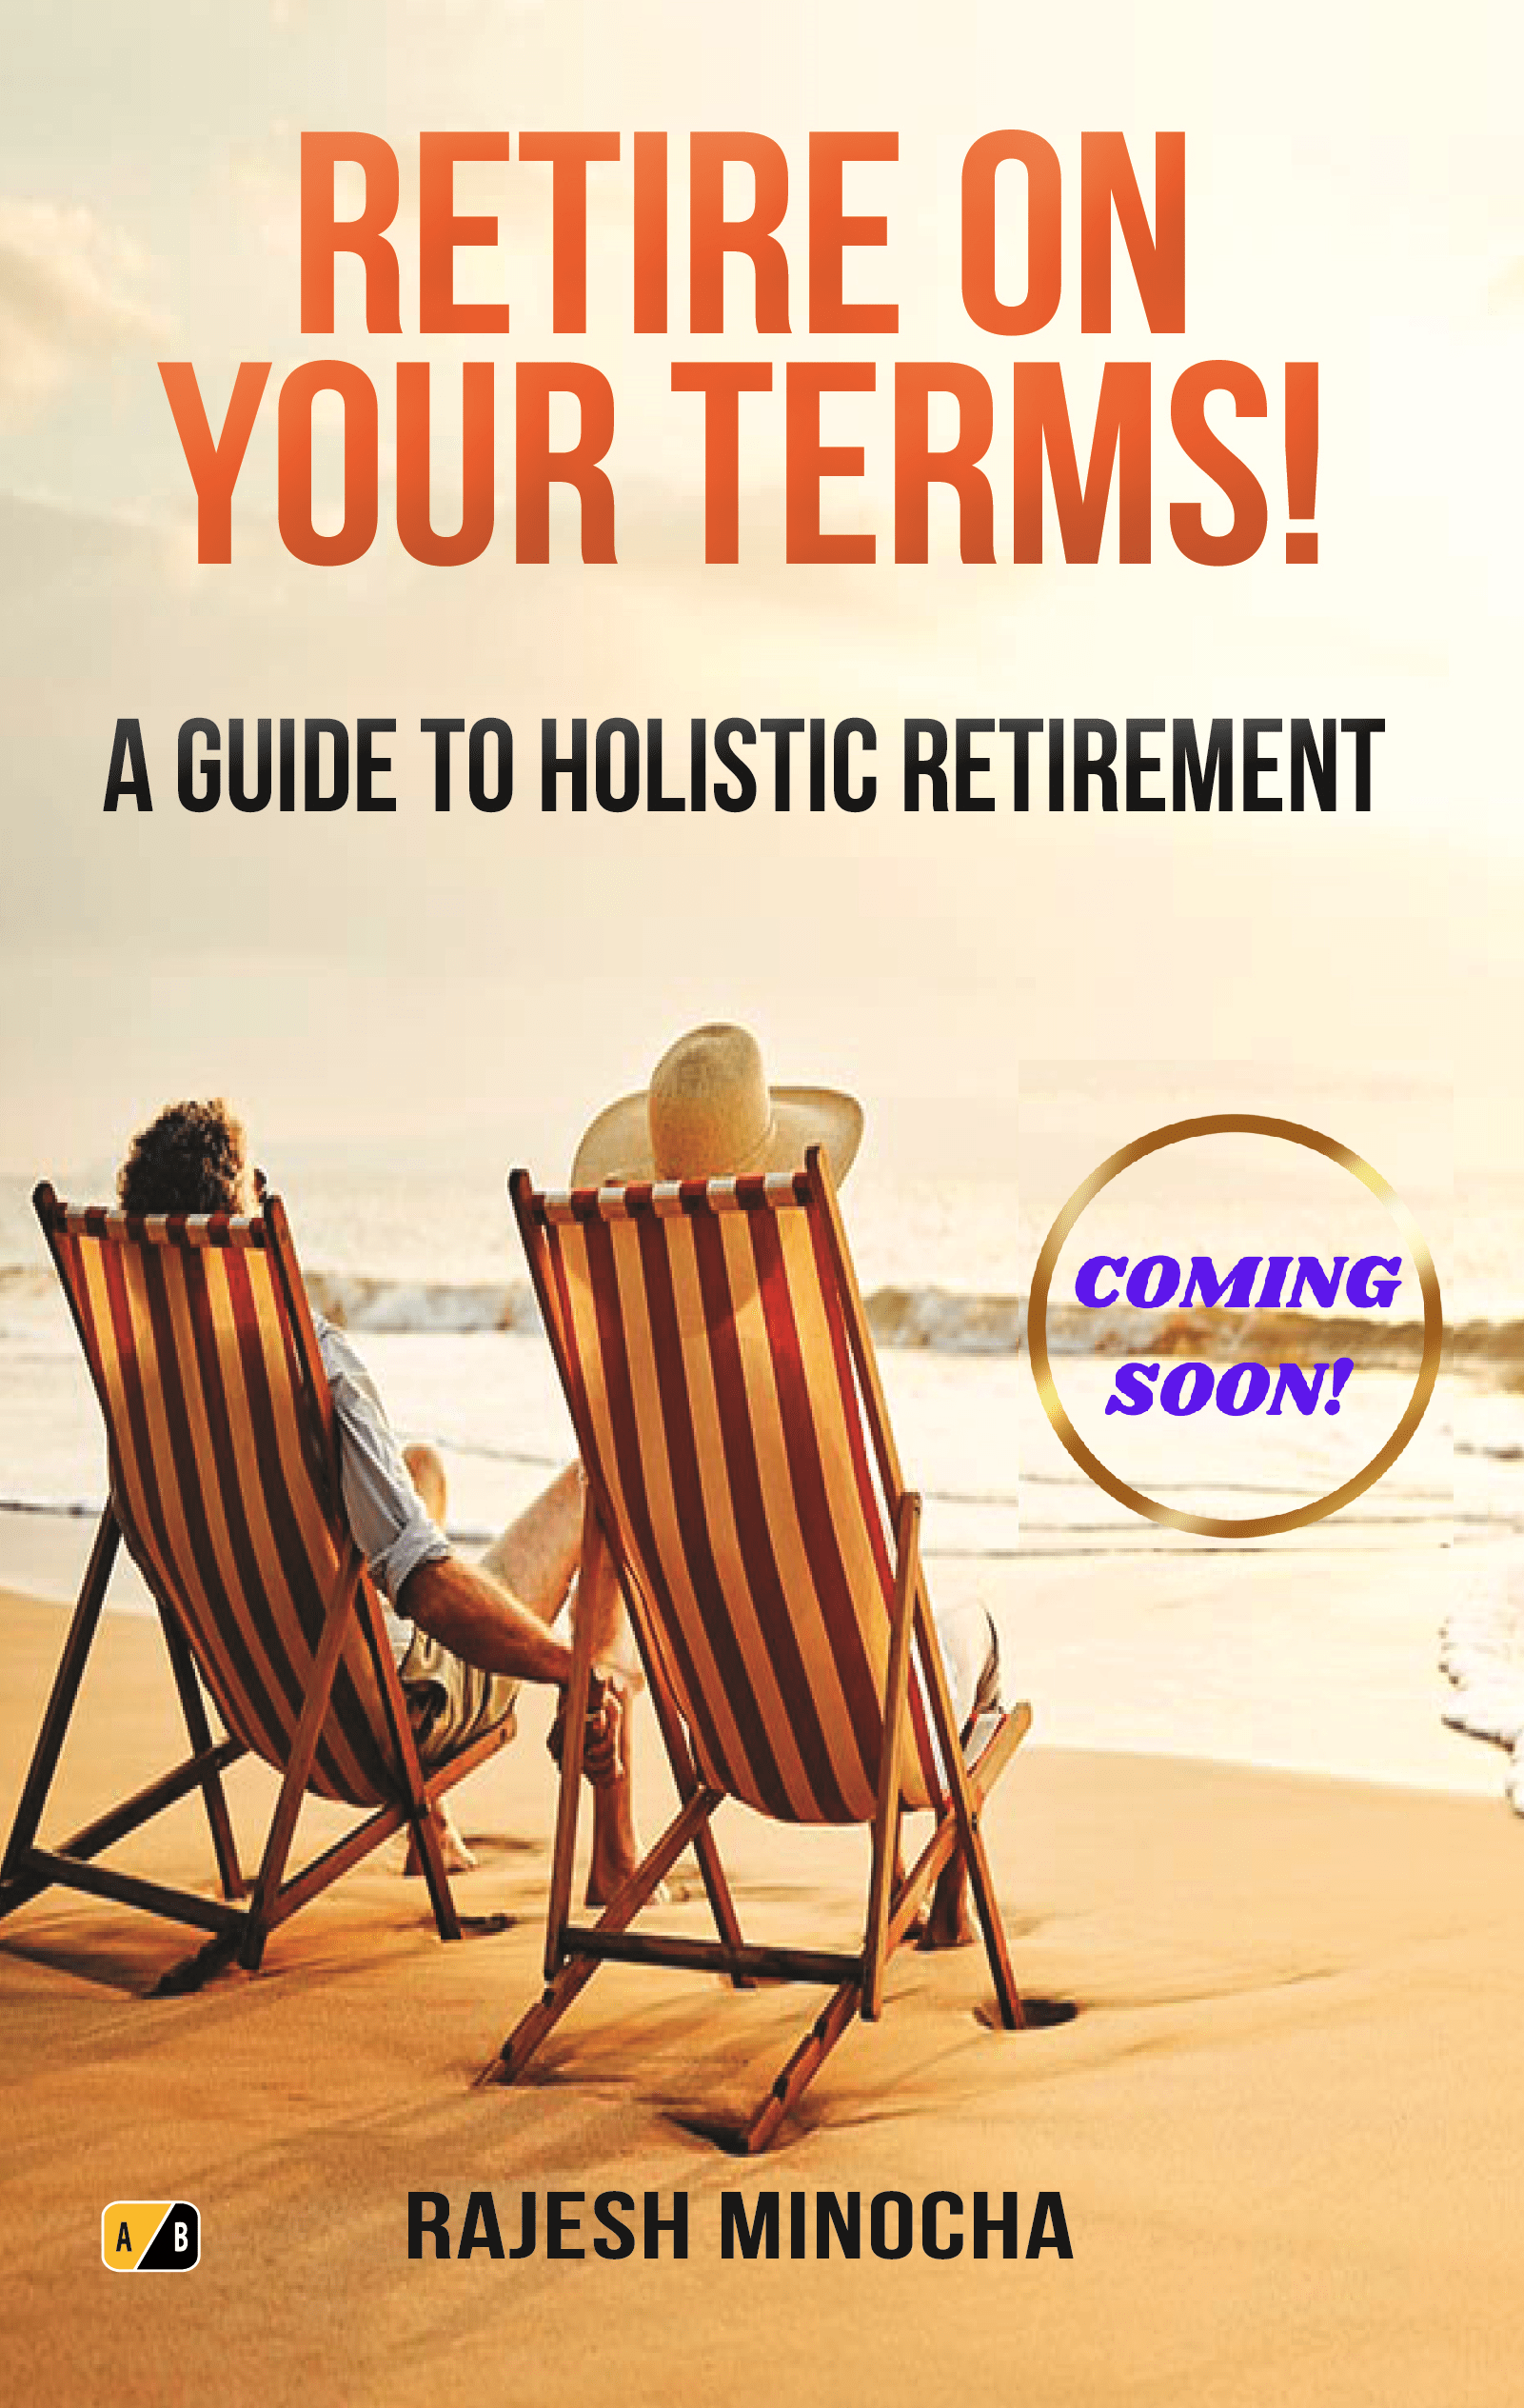 Retire on your terms